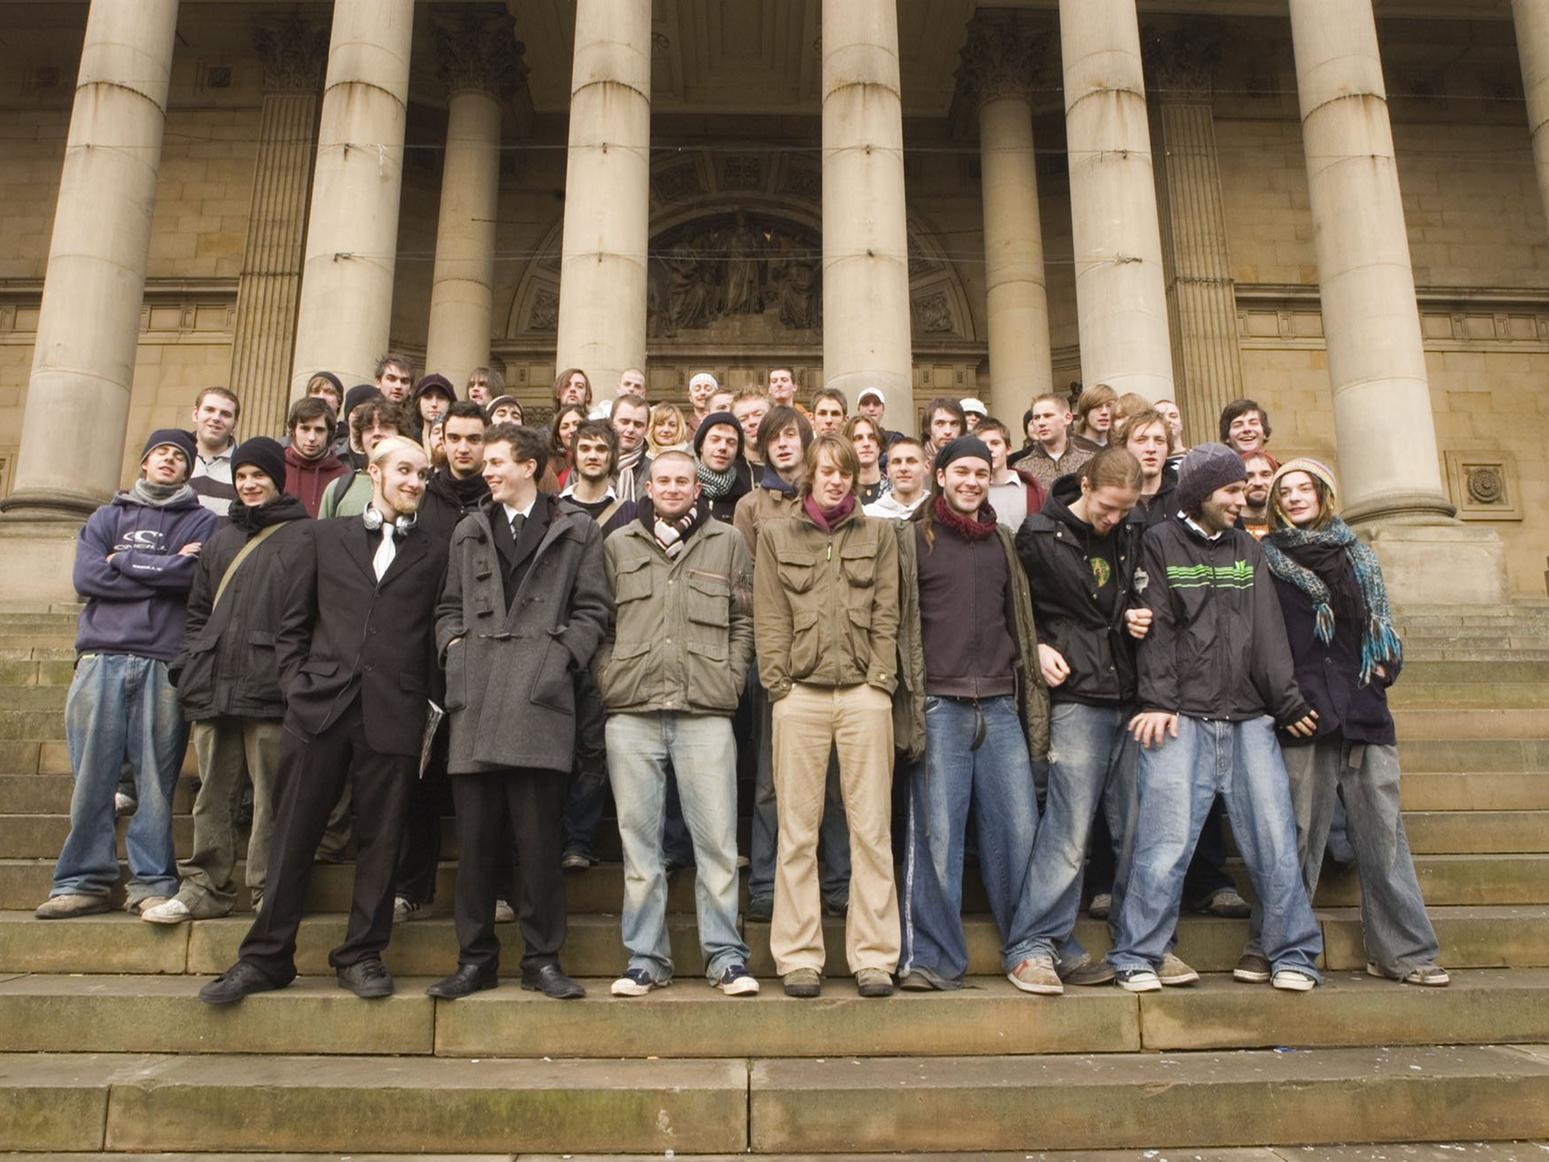 This is a group shot from 2006. Do you remember the bands and artrists?